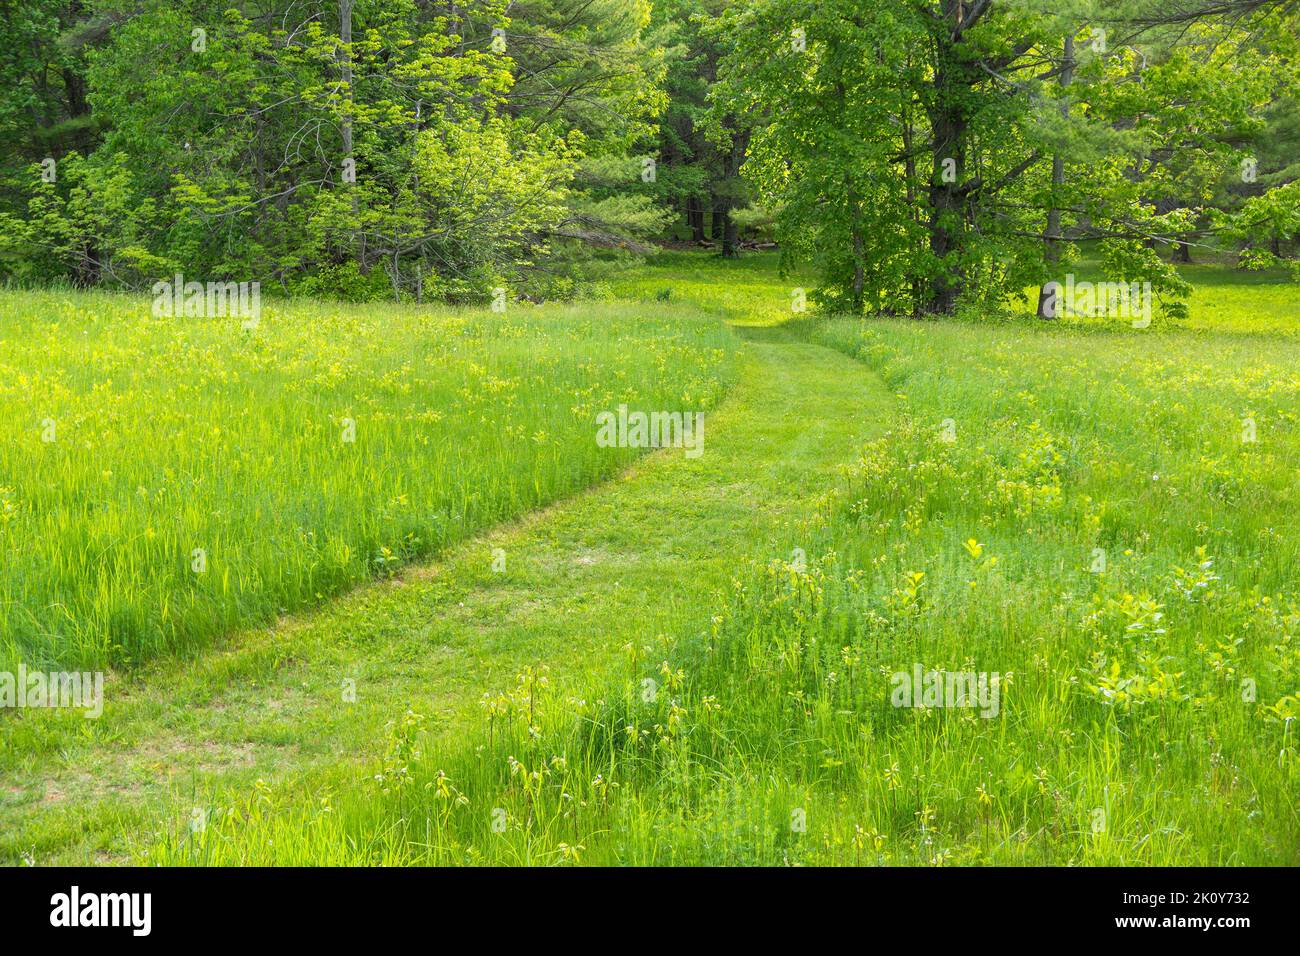 Neatly mowed path through an overgrown lawn into woods late spring in Maine. Stock Photo